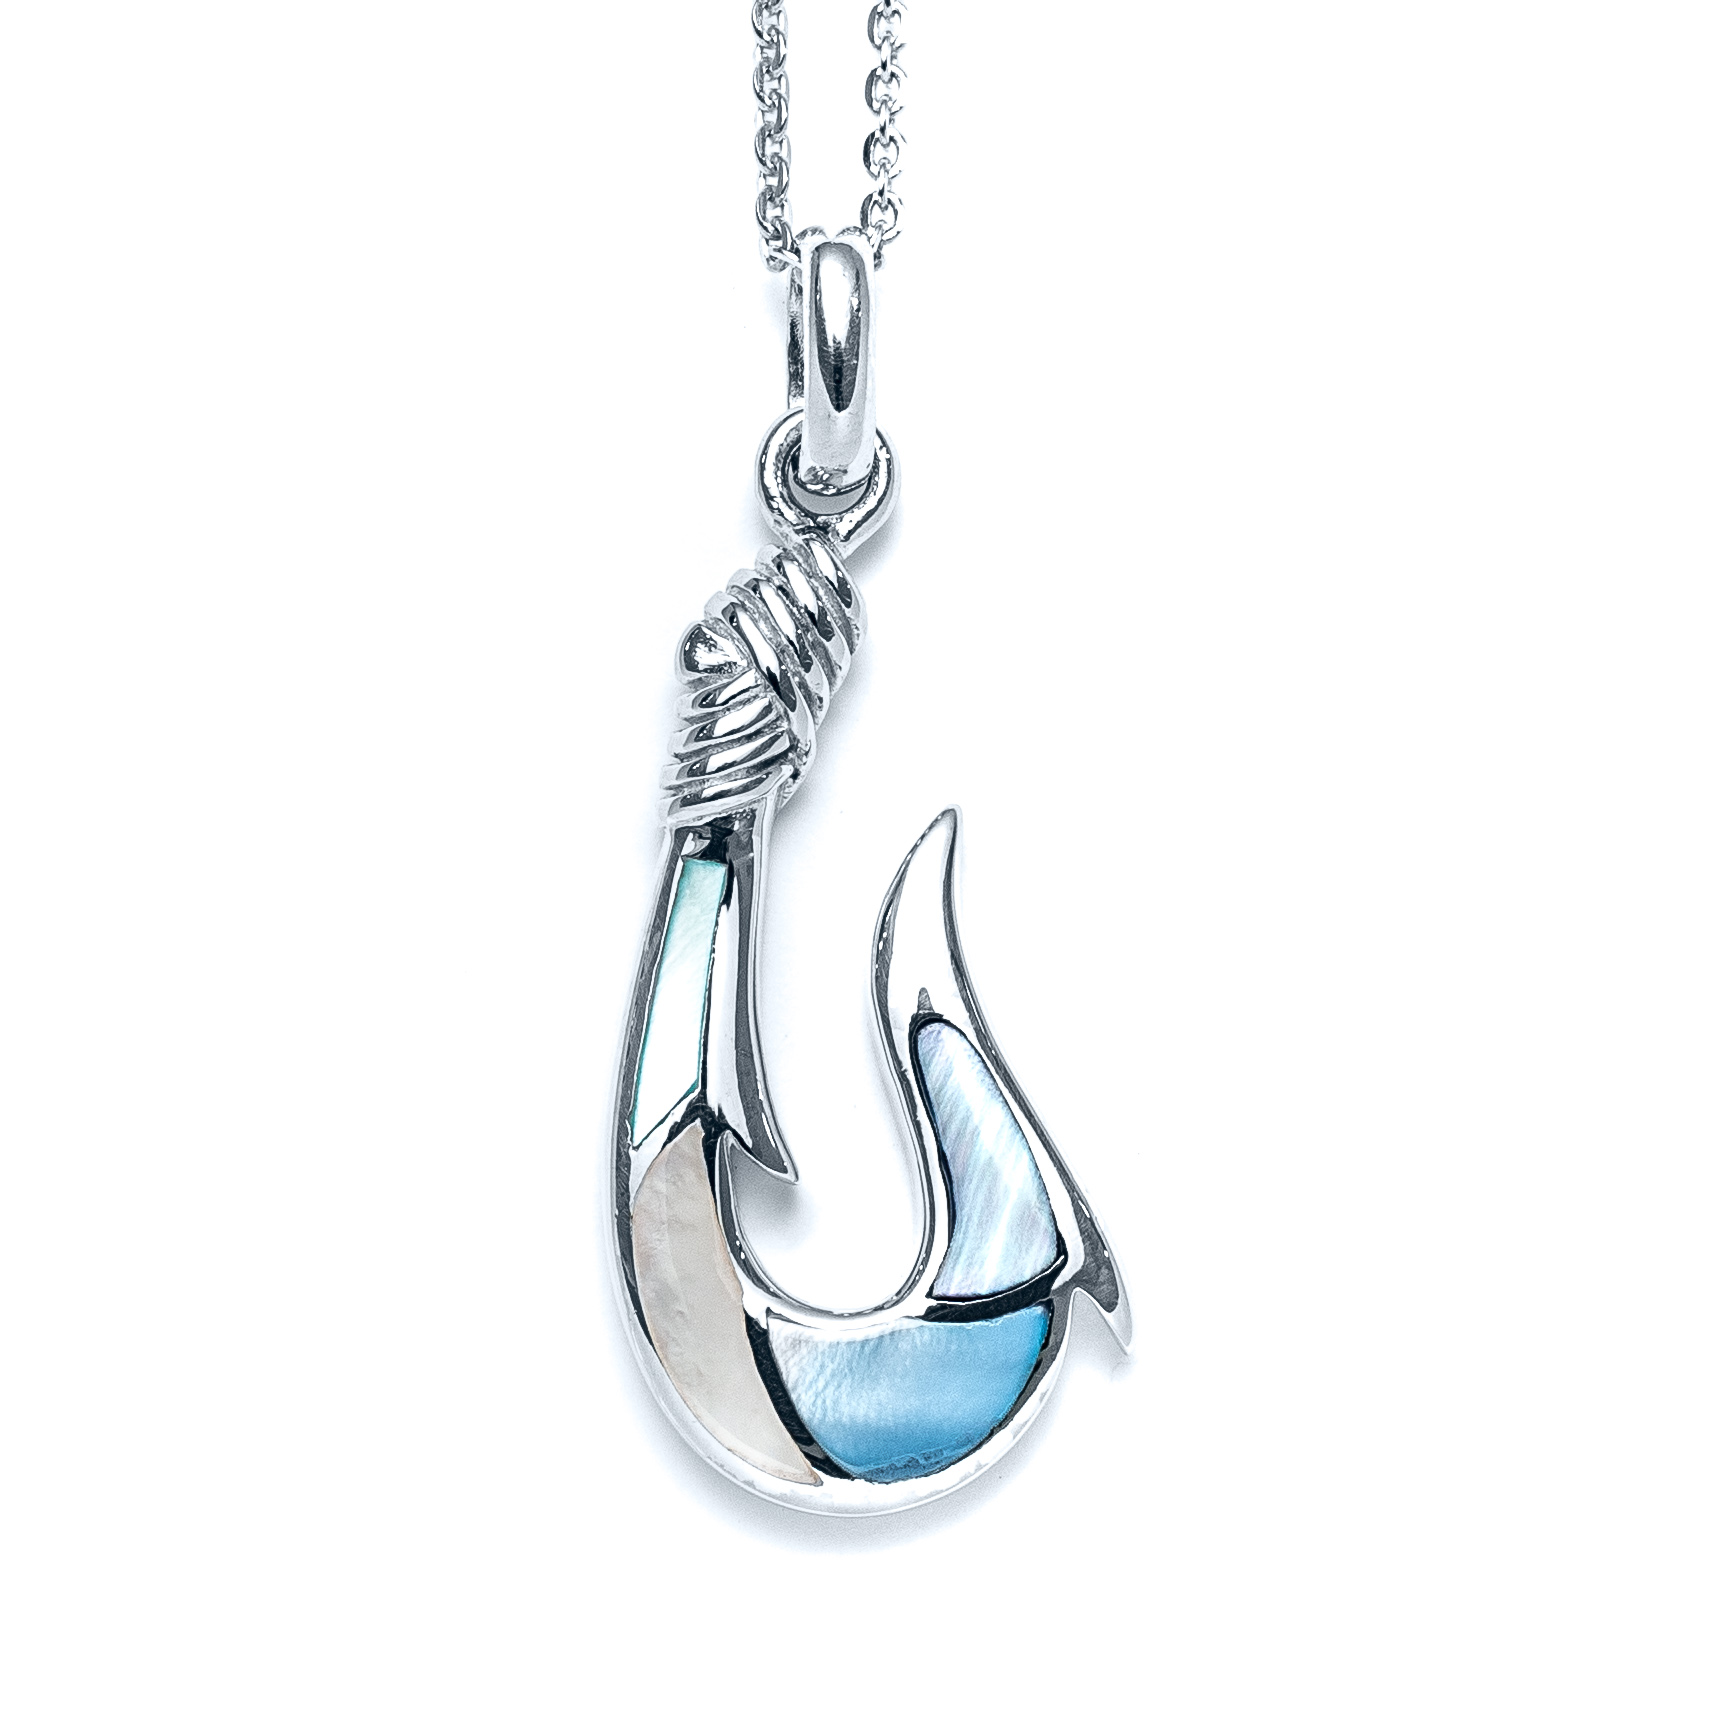 Capri Fish Hook Necklace in Sterling Silver - Landing Company